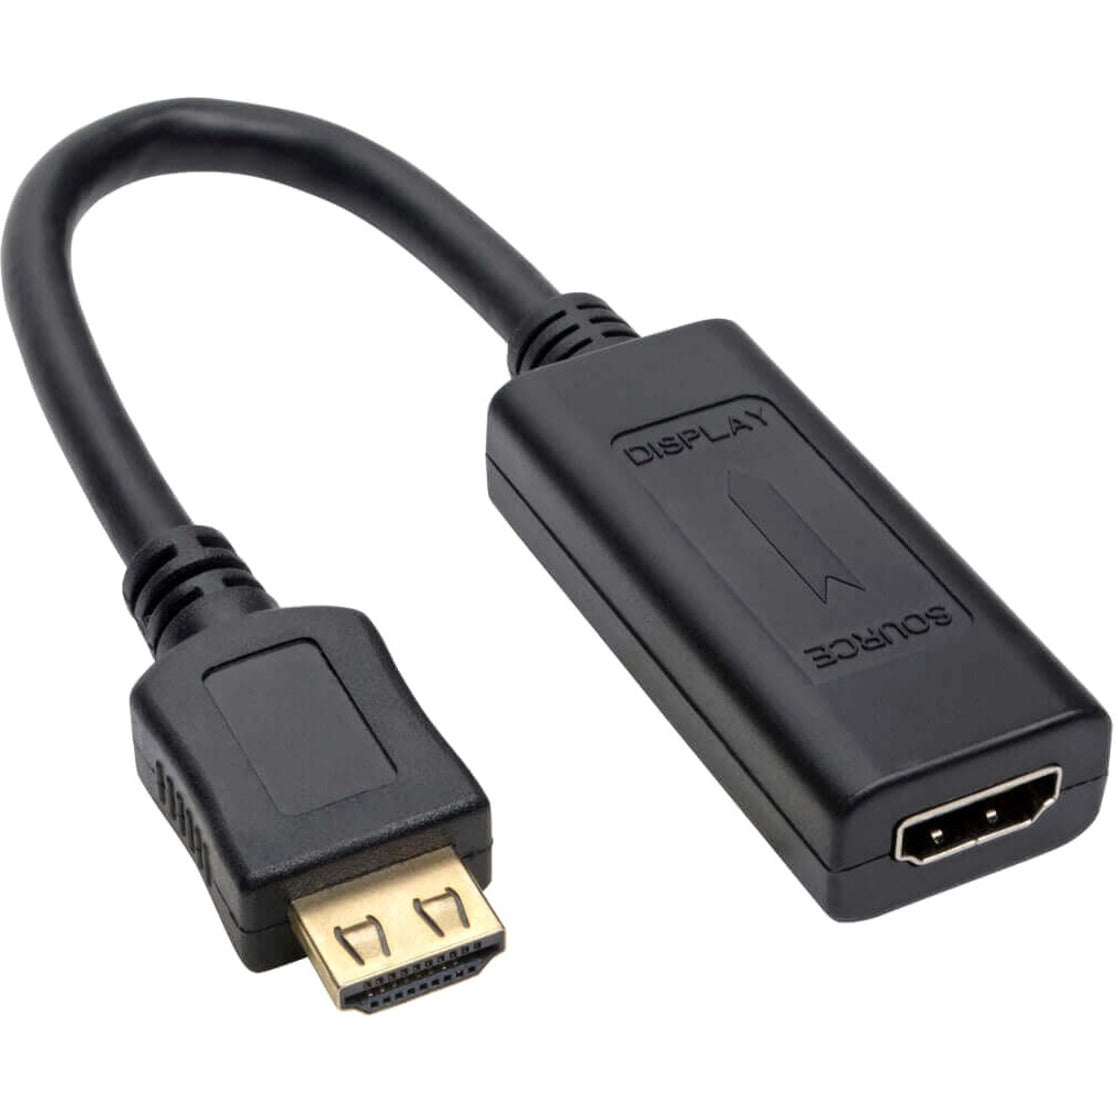 Tripp Lite B123-001-60 1-ft. HDMI Active Signal Extender Cable, Enhance Your HDMI Signal with Ease